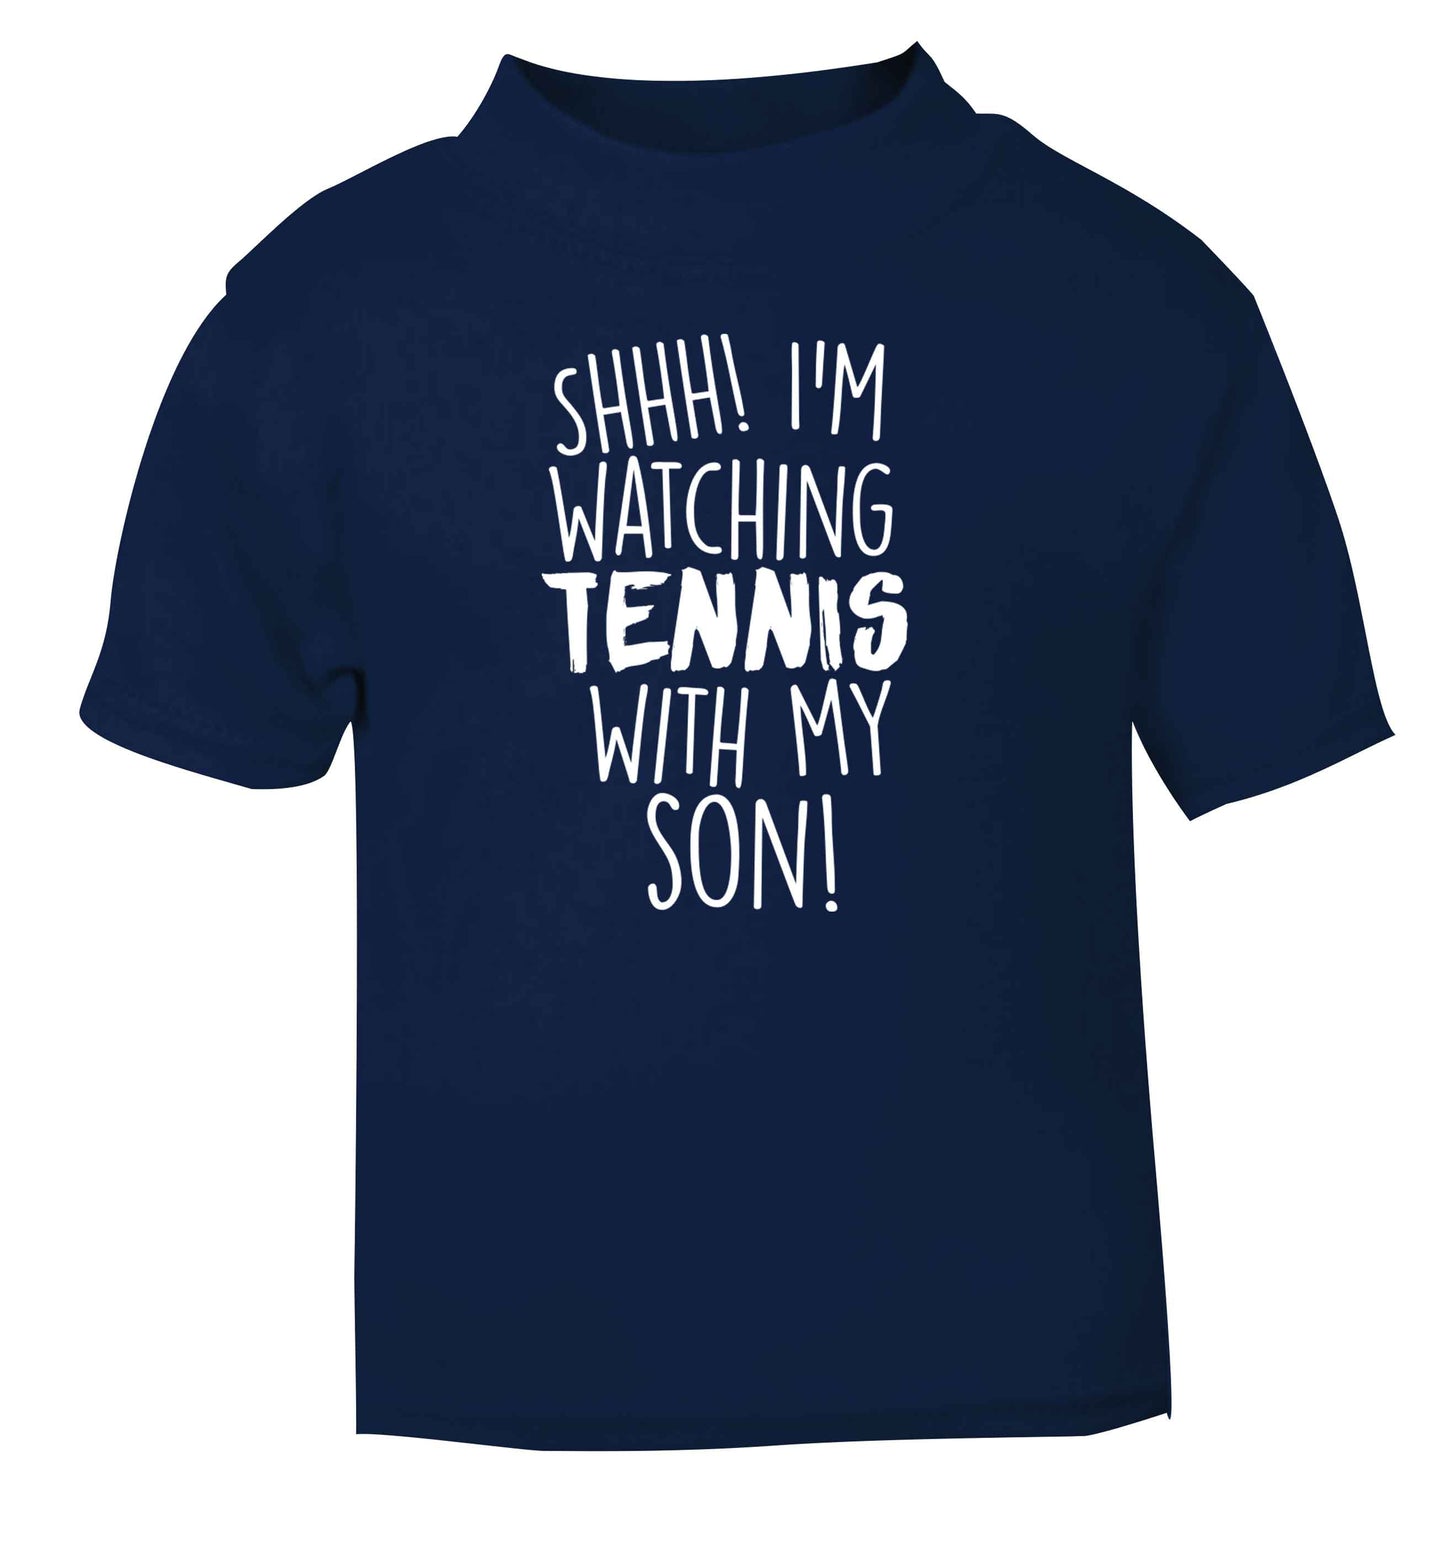 Shh! I'm watching tennis with my son! navy Baby Toddler Tshirt 2 Years